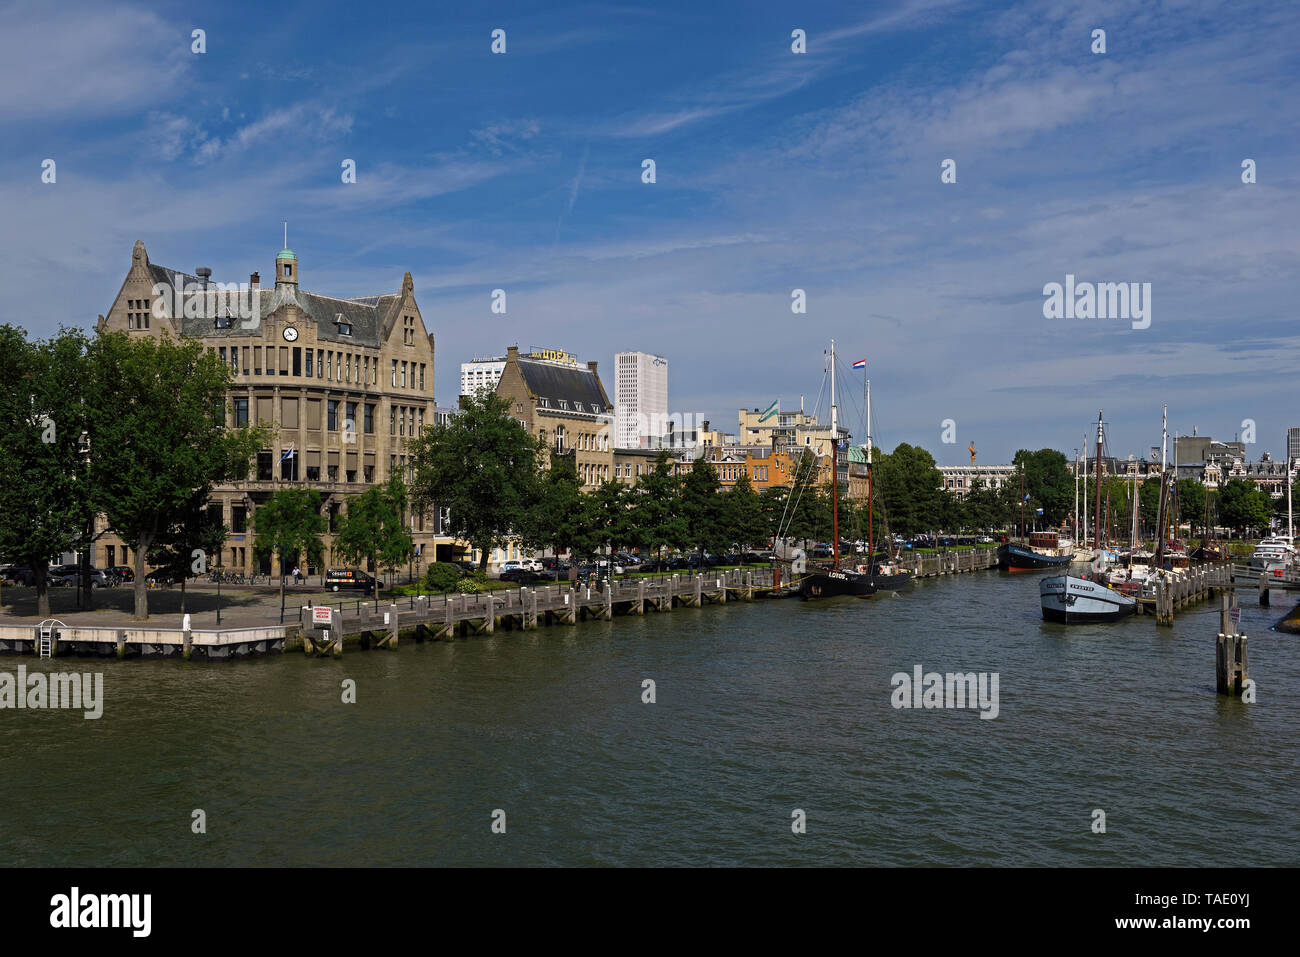 rotterdam, netherlands - 2017.07.18: view onto historic veerhaven in scheepvaartkwartier (shipping quarter)  at the banks of the nieuwe maas Stock Photo